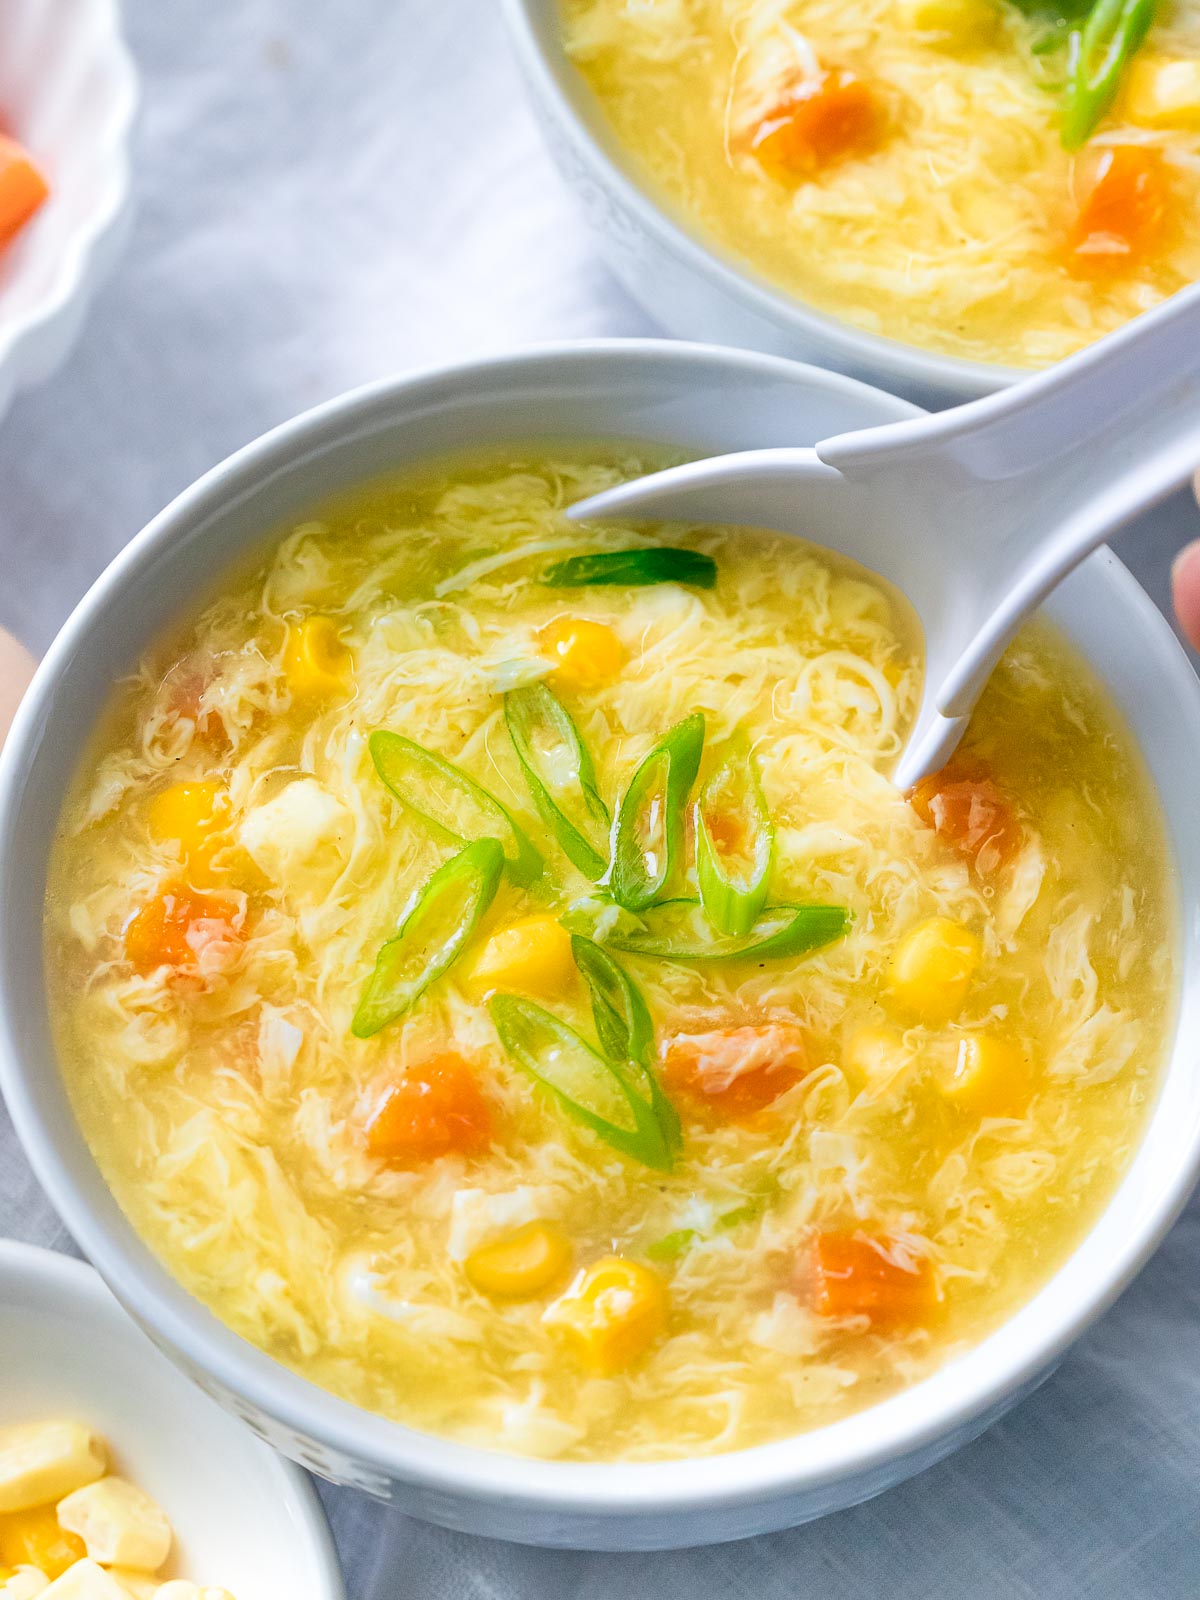 bowl of authentic egg drop soup with corn, carrots, and scallions with a spoon